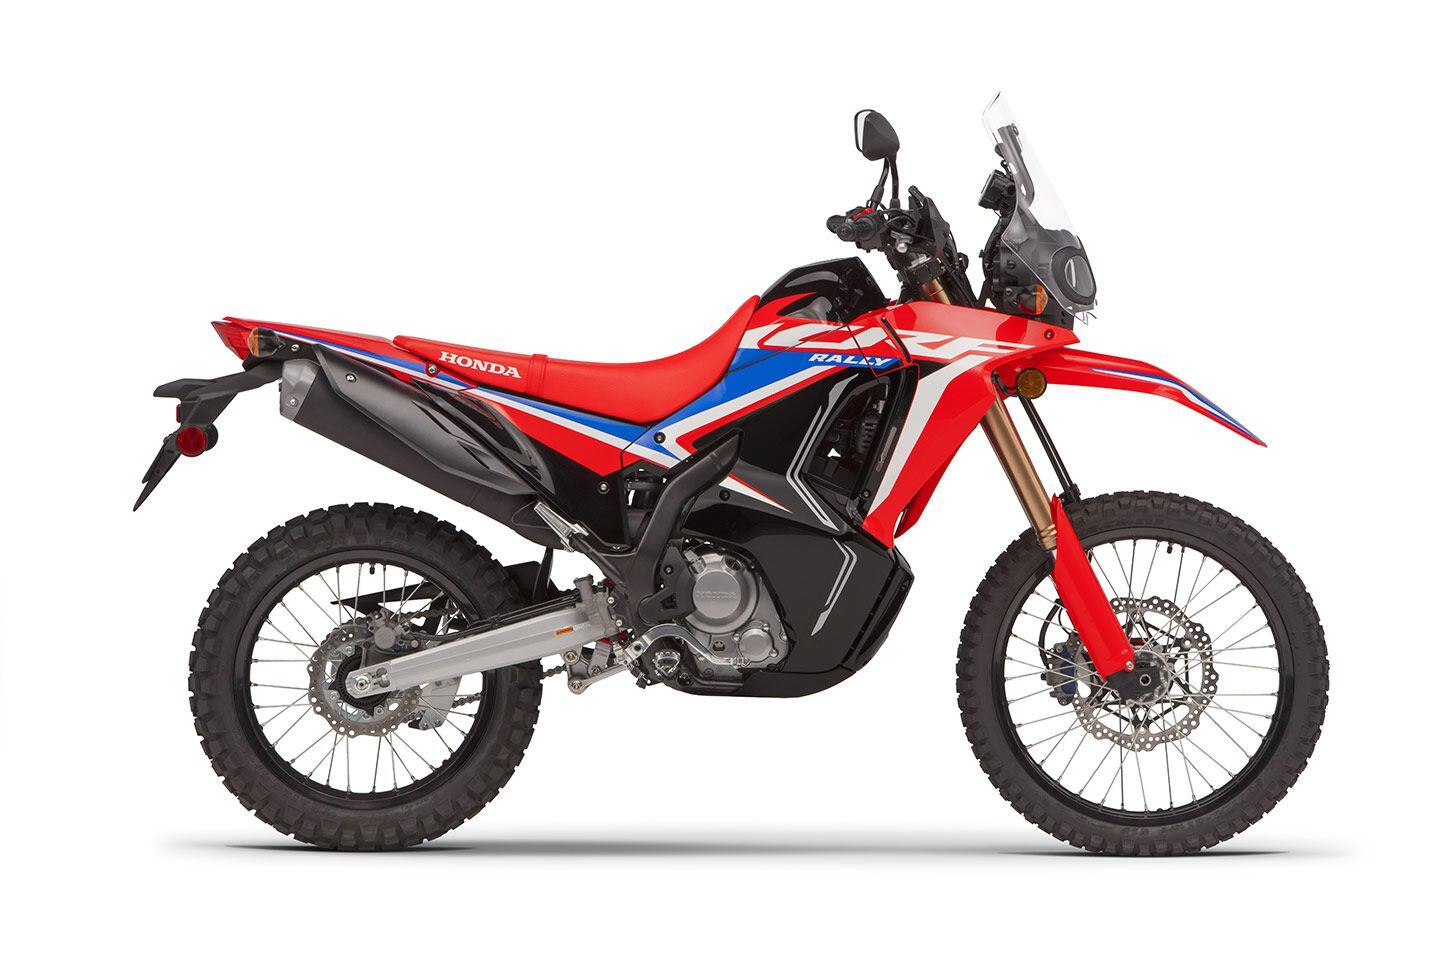 The base CRF300L Rally has an MSRP of $6,149. For ABS, add another $300.